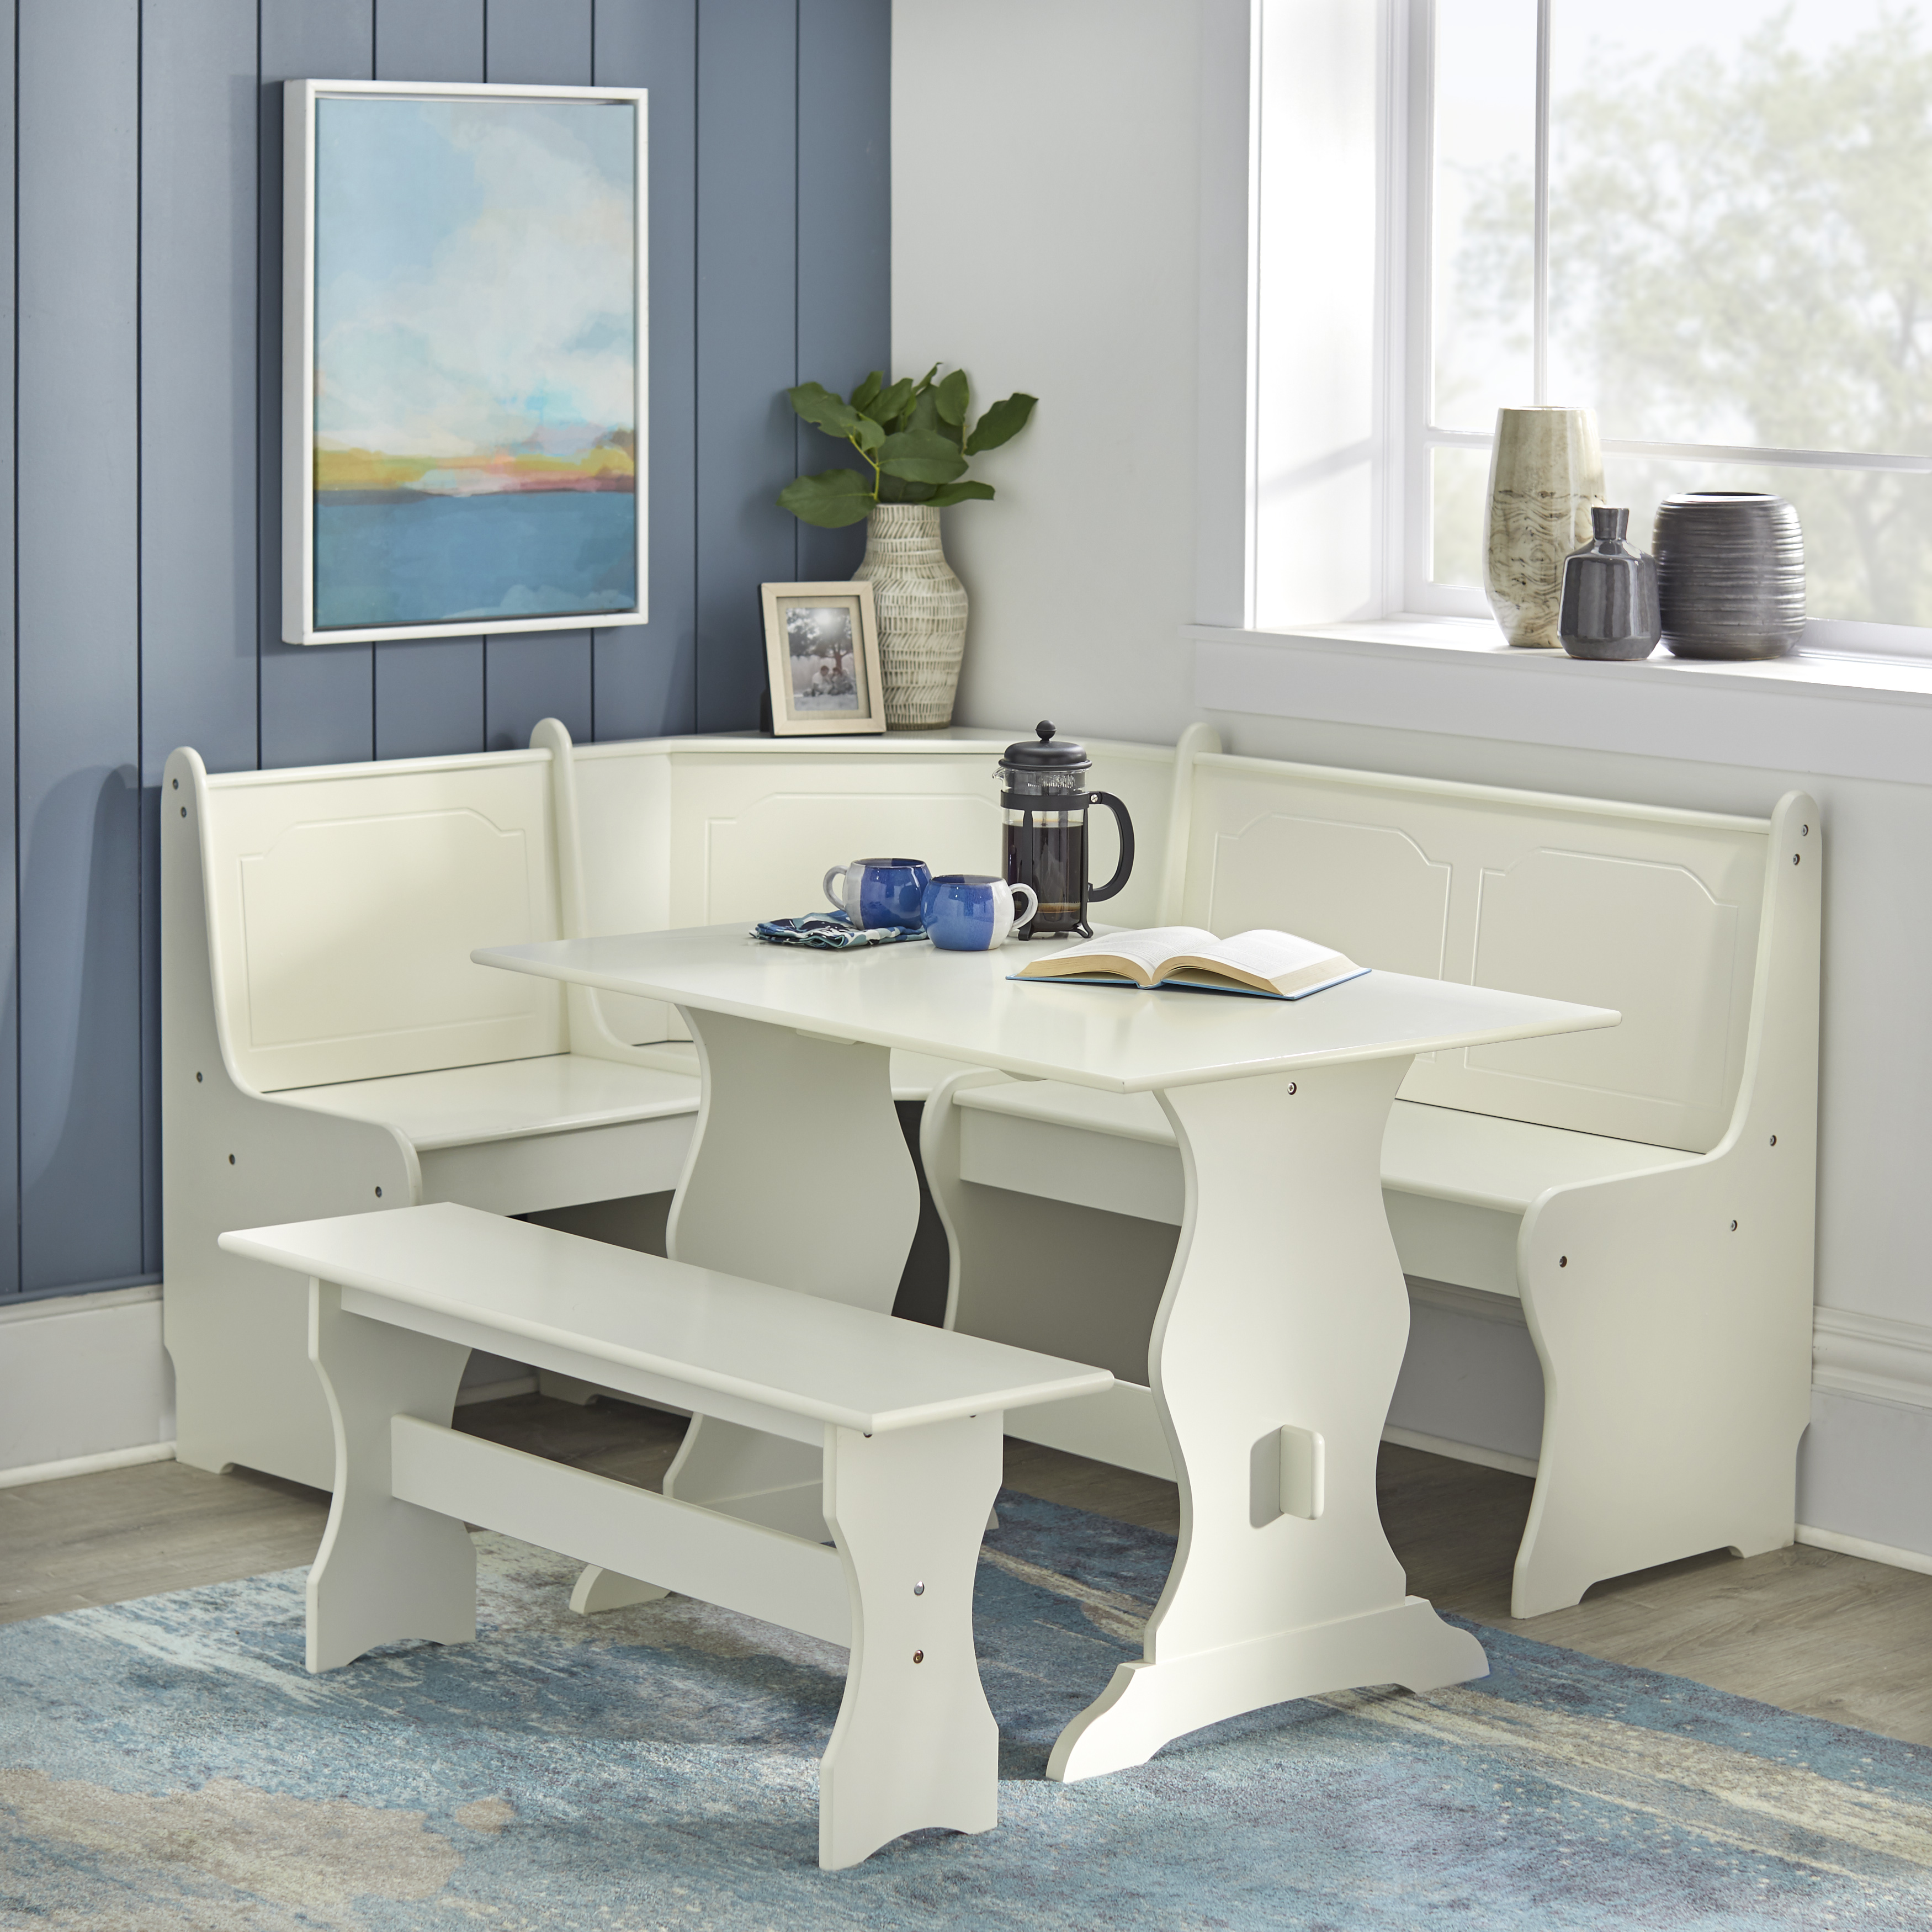 TMS Corner Reversible Dining Breakfast Nook with Storage, White - image 1 of 7